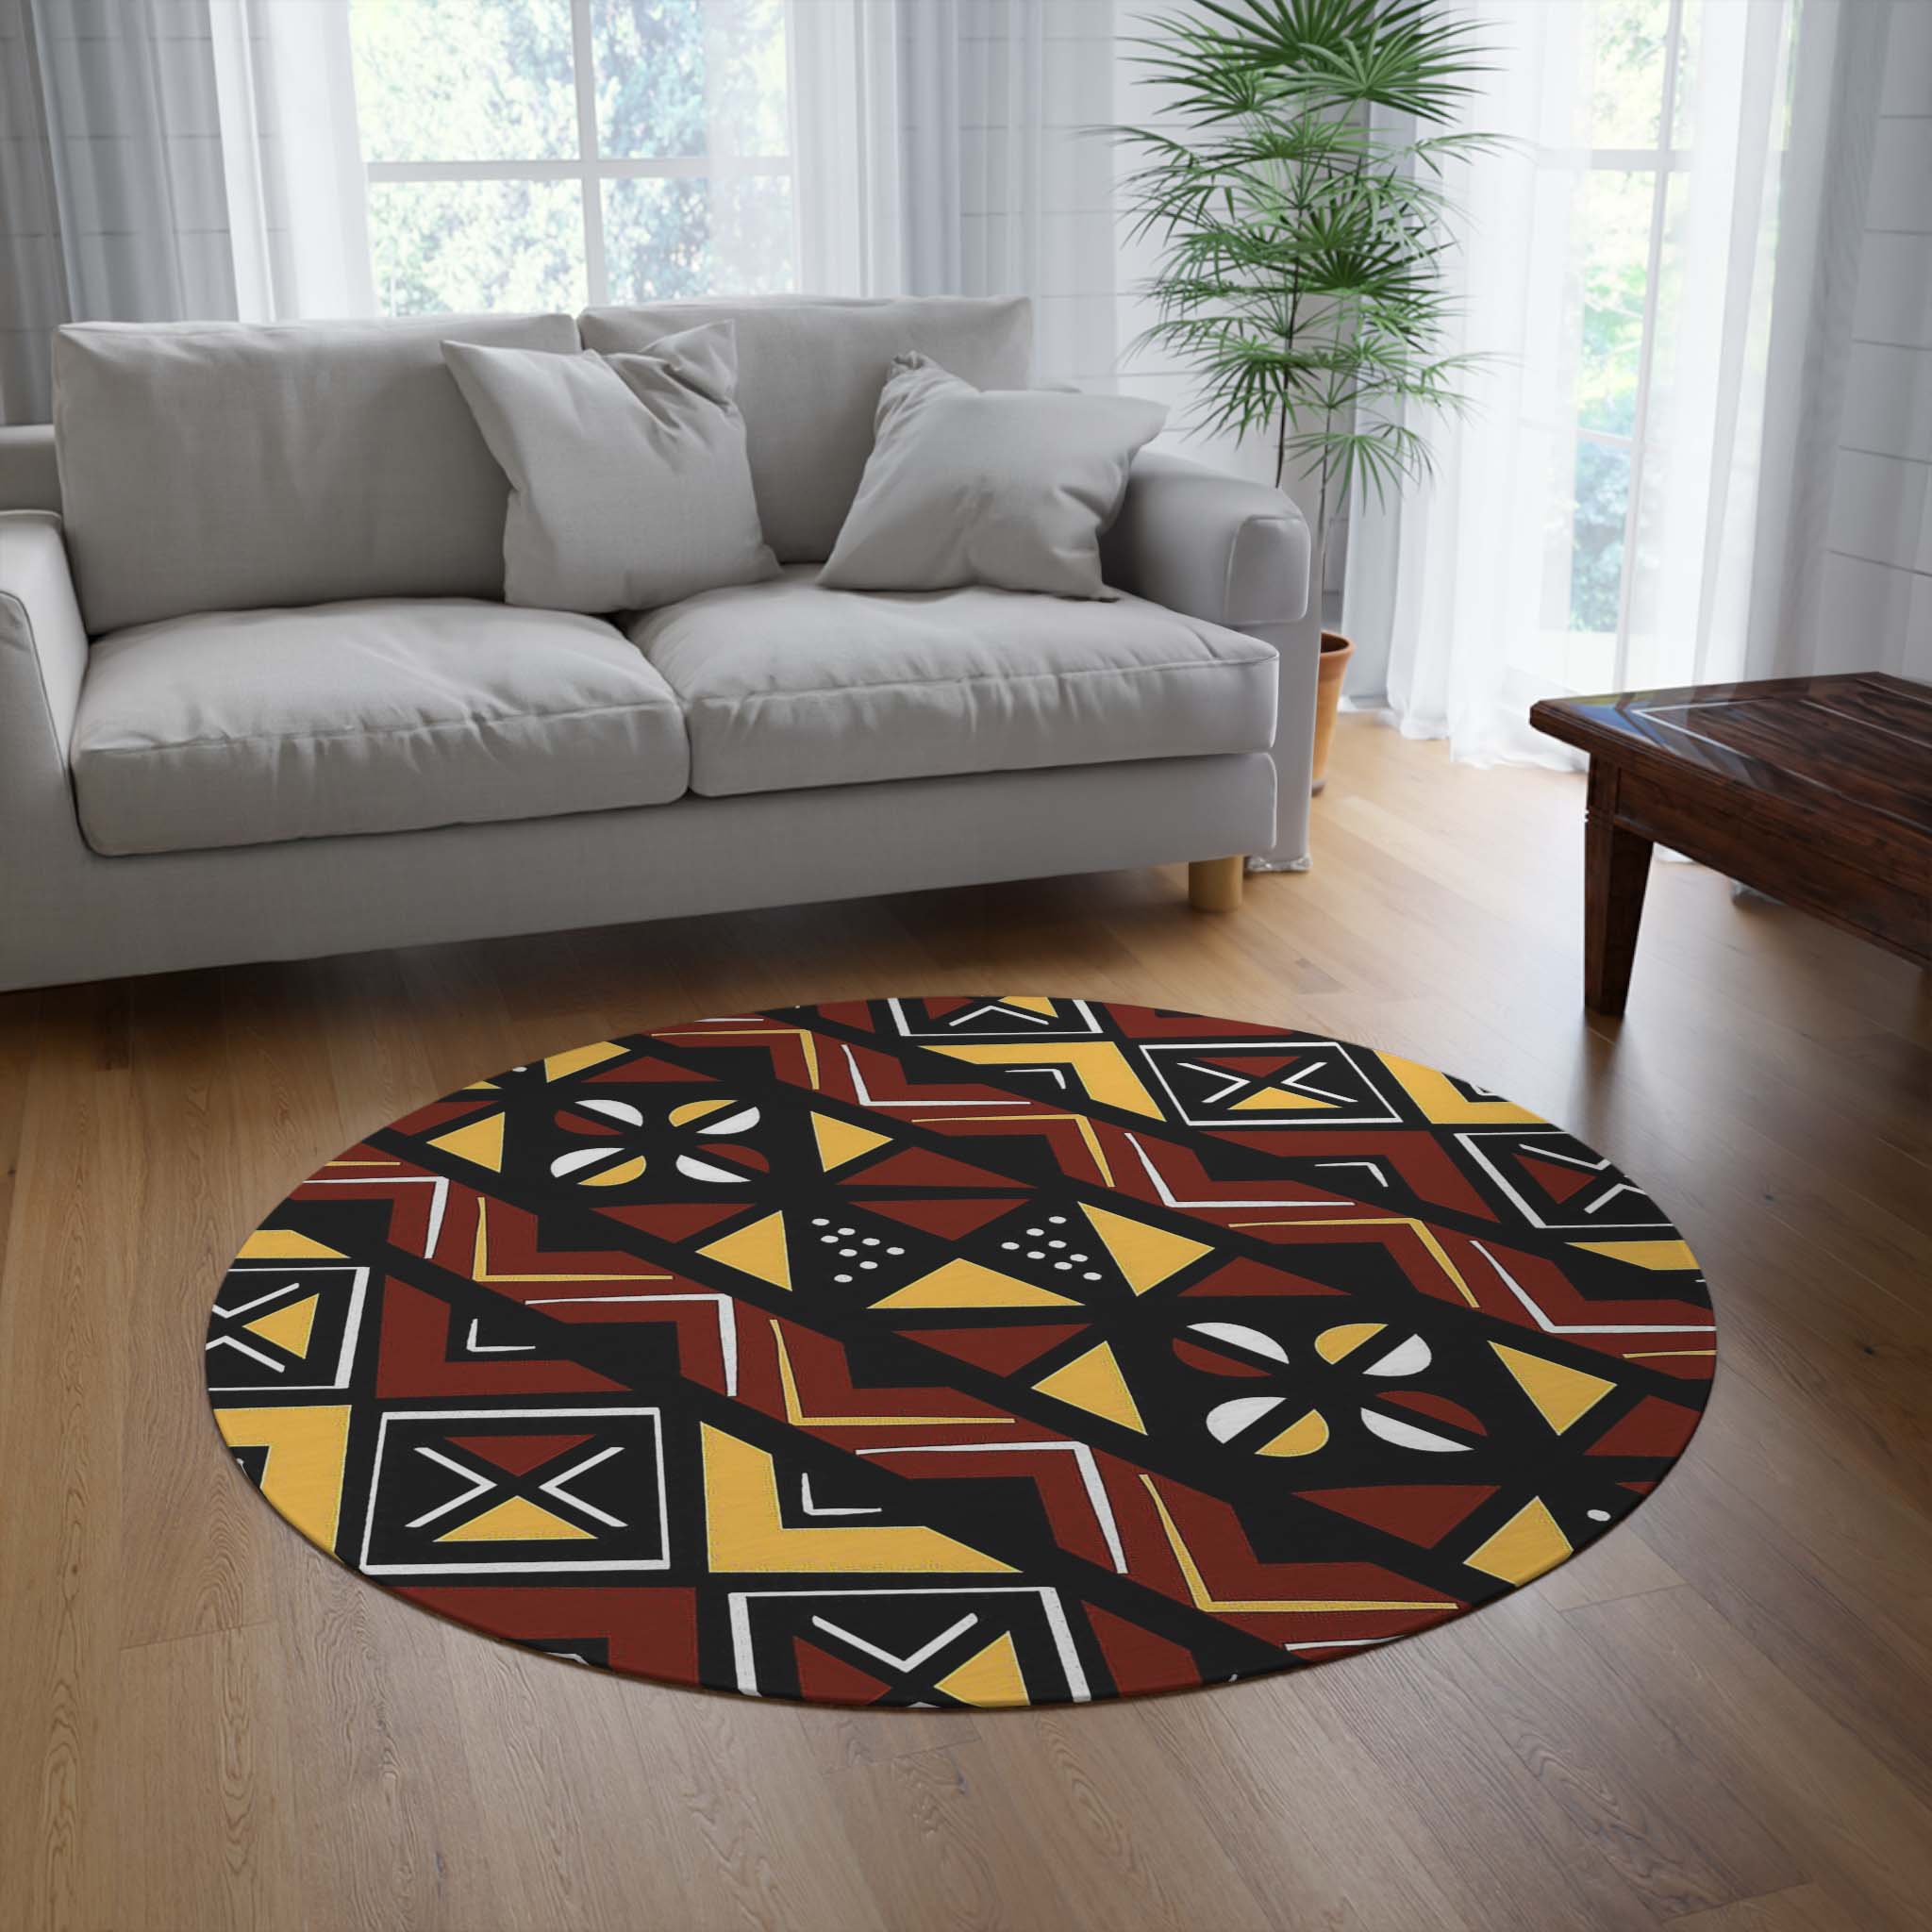 African Style Rug Round Carpet Mudcloth Print - Bynelo